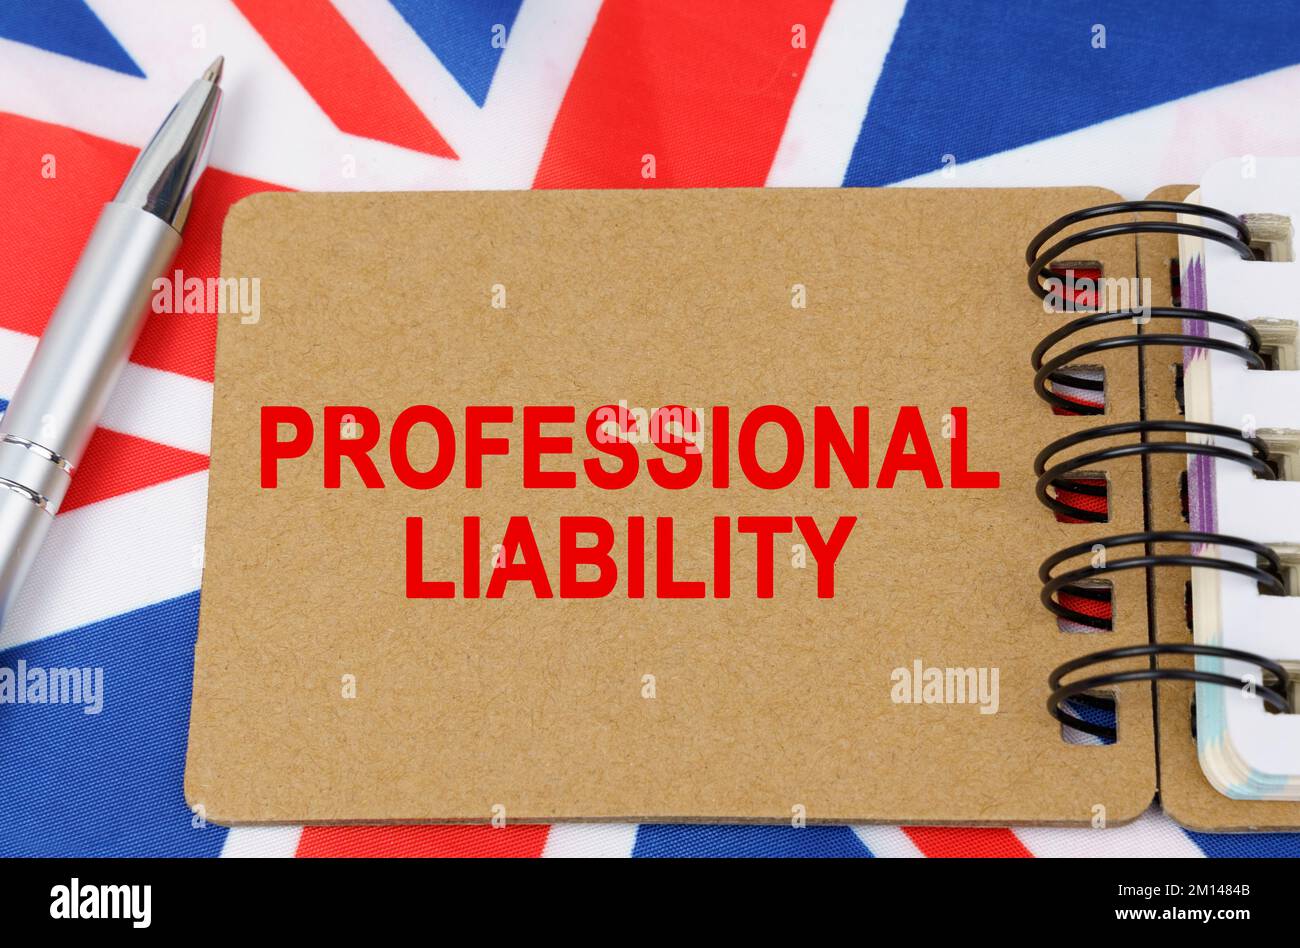 Law and justice concept. Against the background of the flag of Great Britain lies a notebook with the inscription - PROFESSIONAL LIABILITY Stock Photo